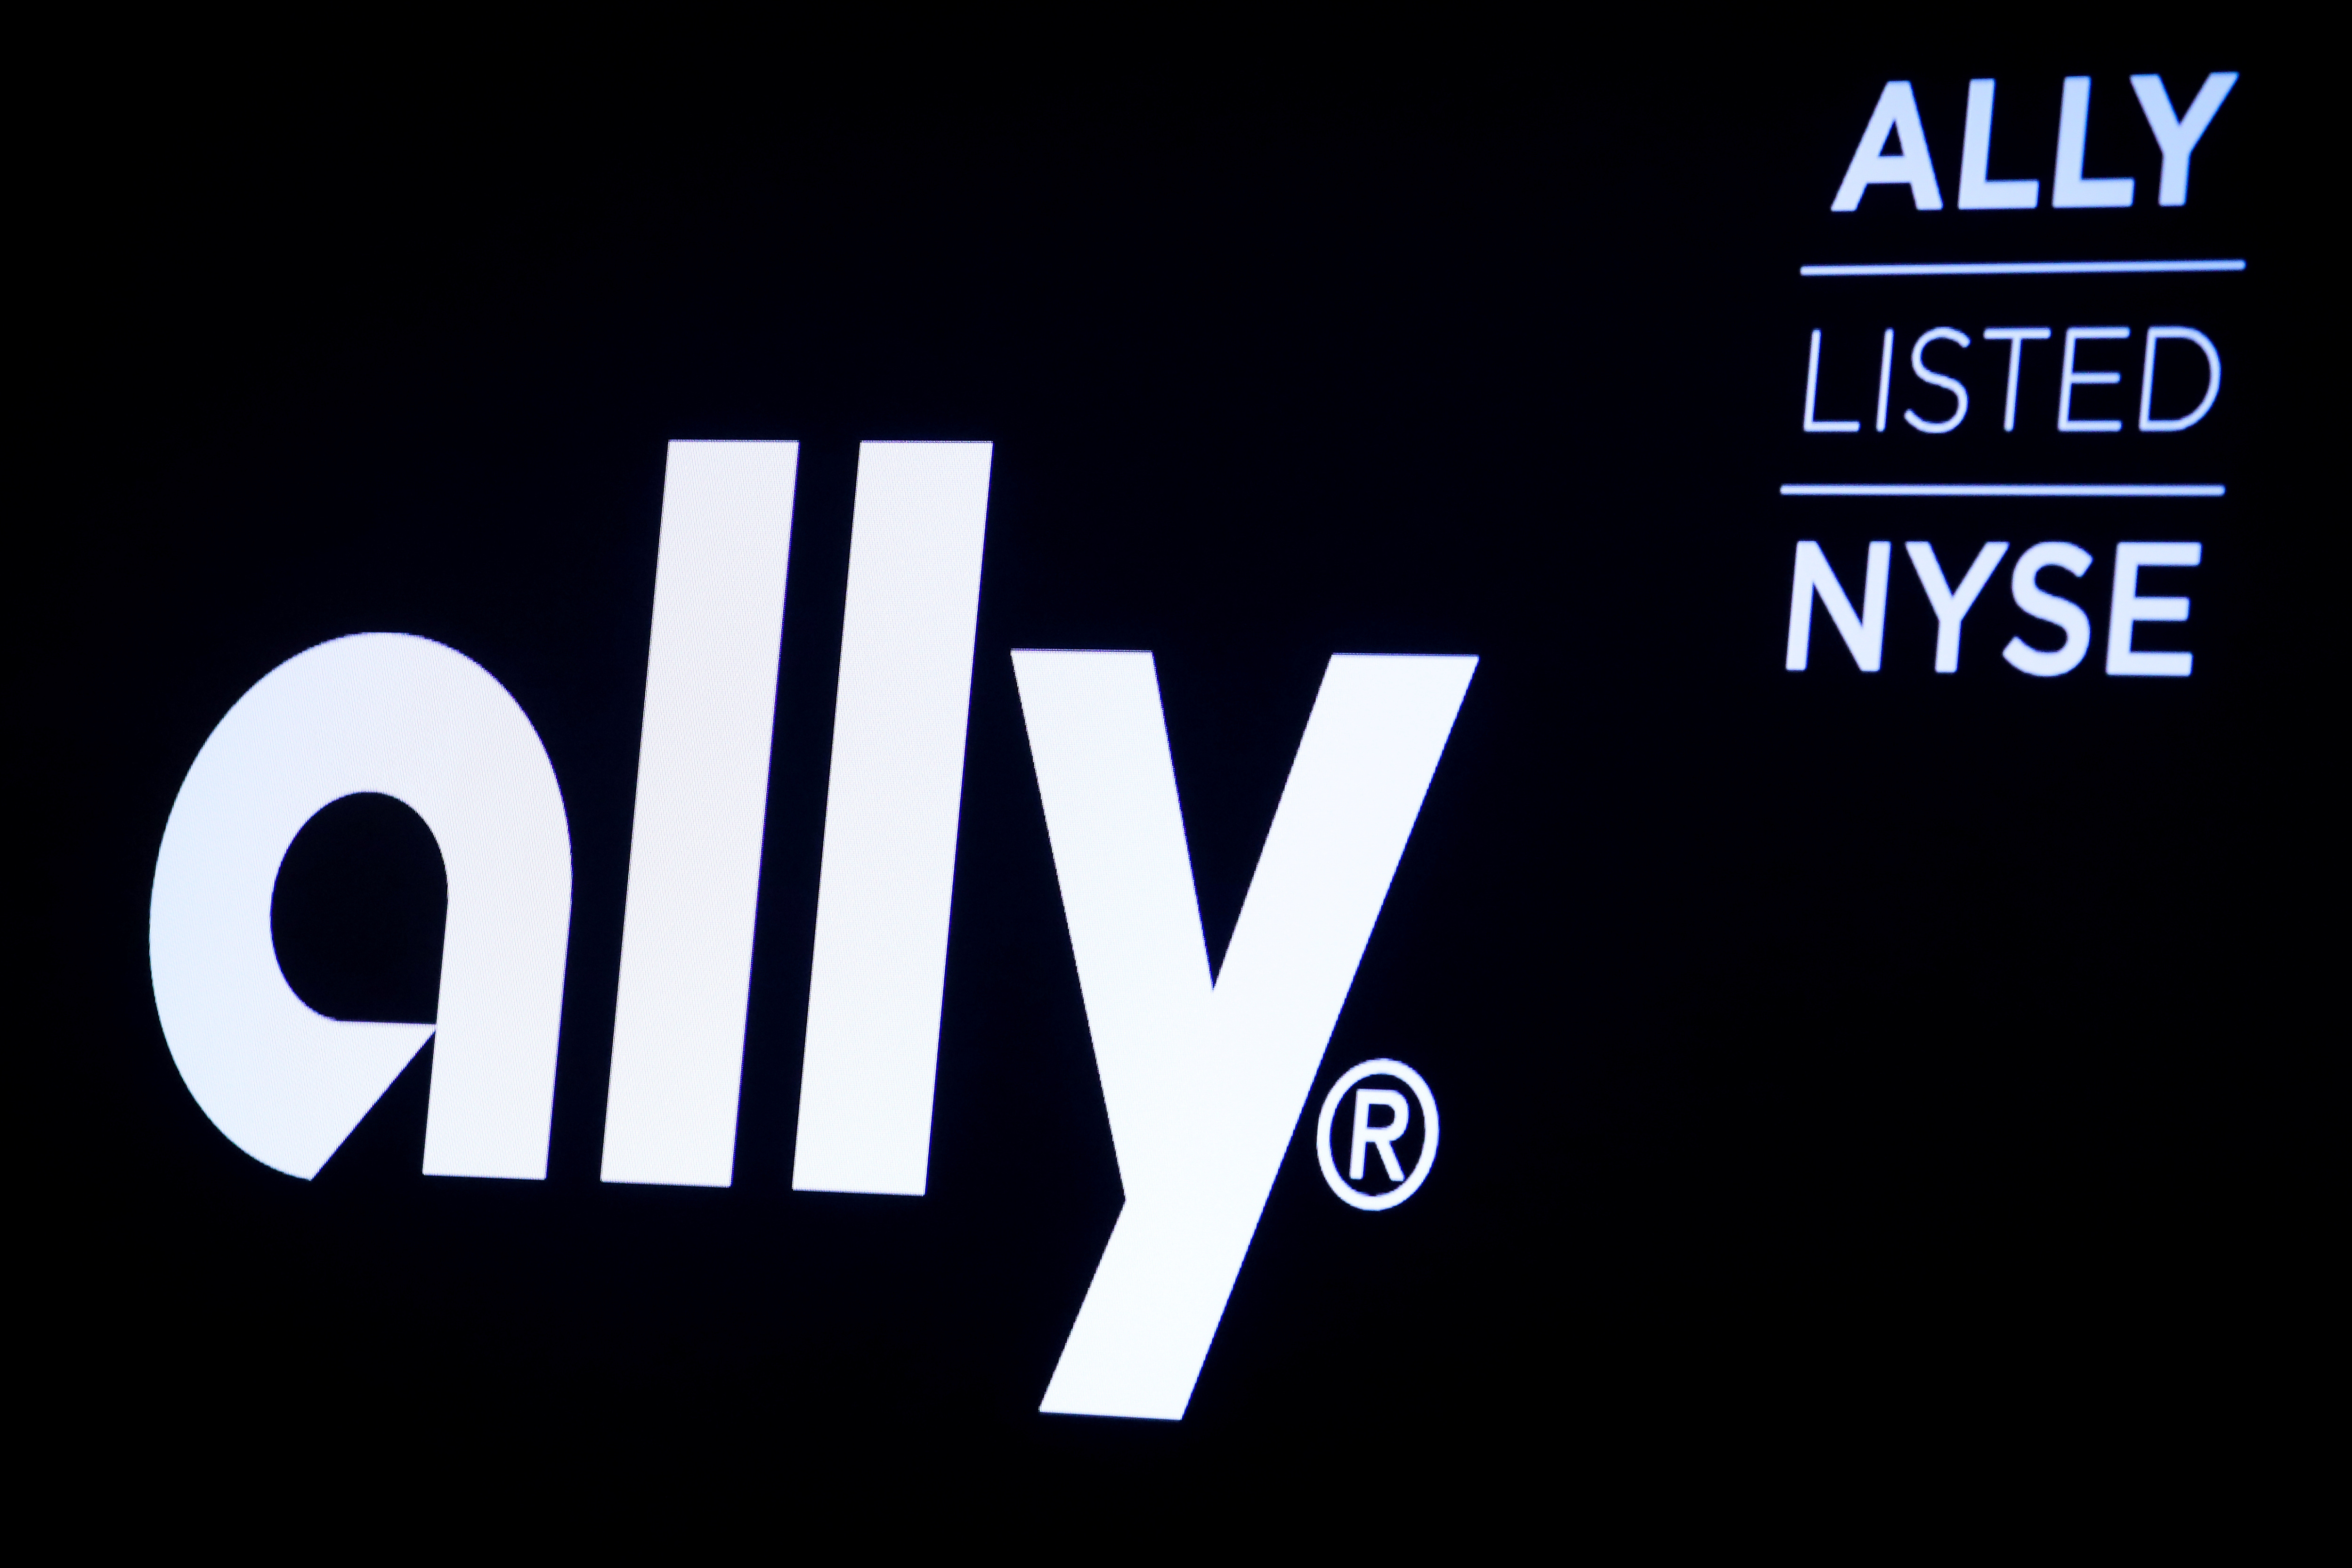 The logo and trading information for Ally Financial Inc appear on a screen on the floor at the NYSE in New York